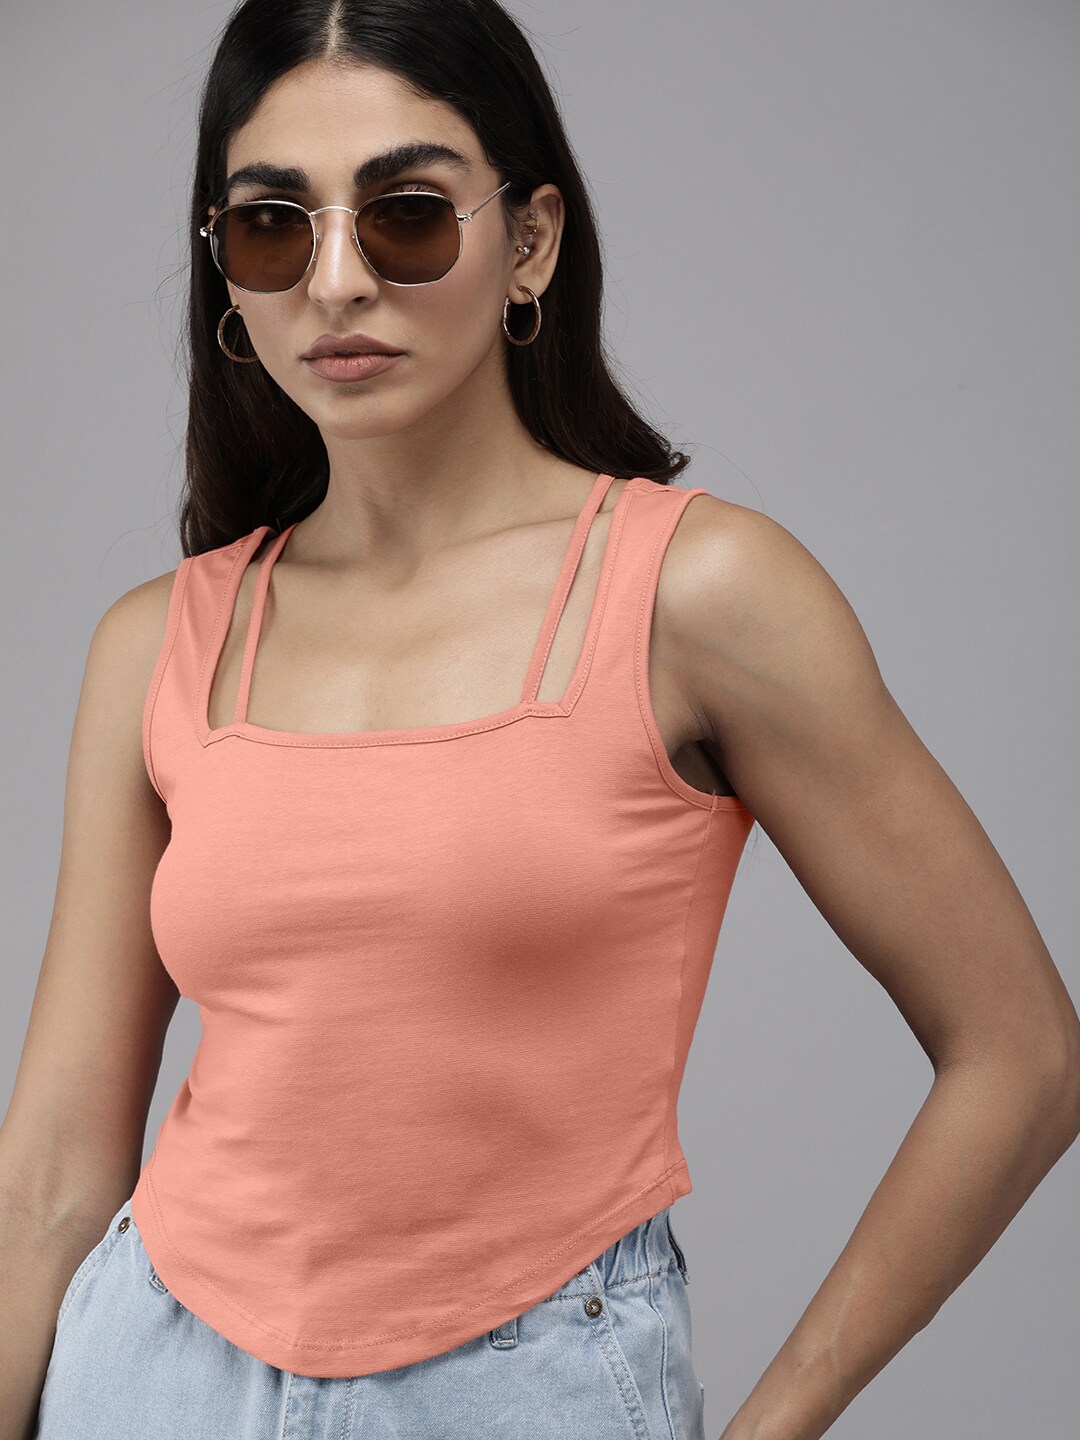 The Roadster Lifestyle Co. Square Neck Fitted Top Price in India